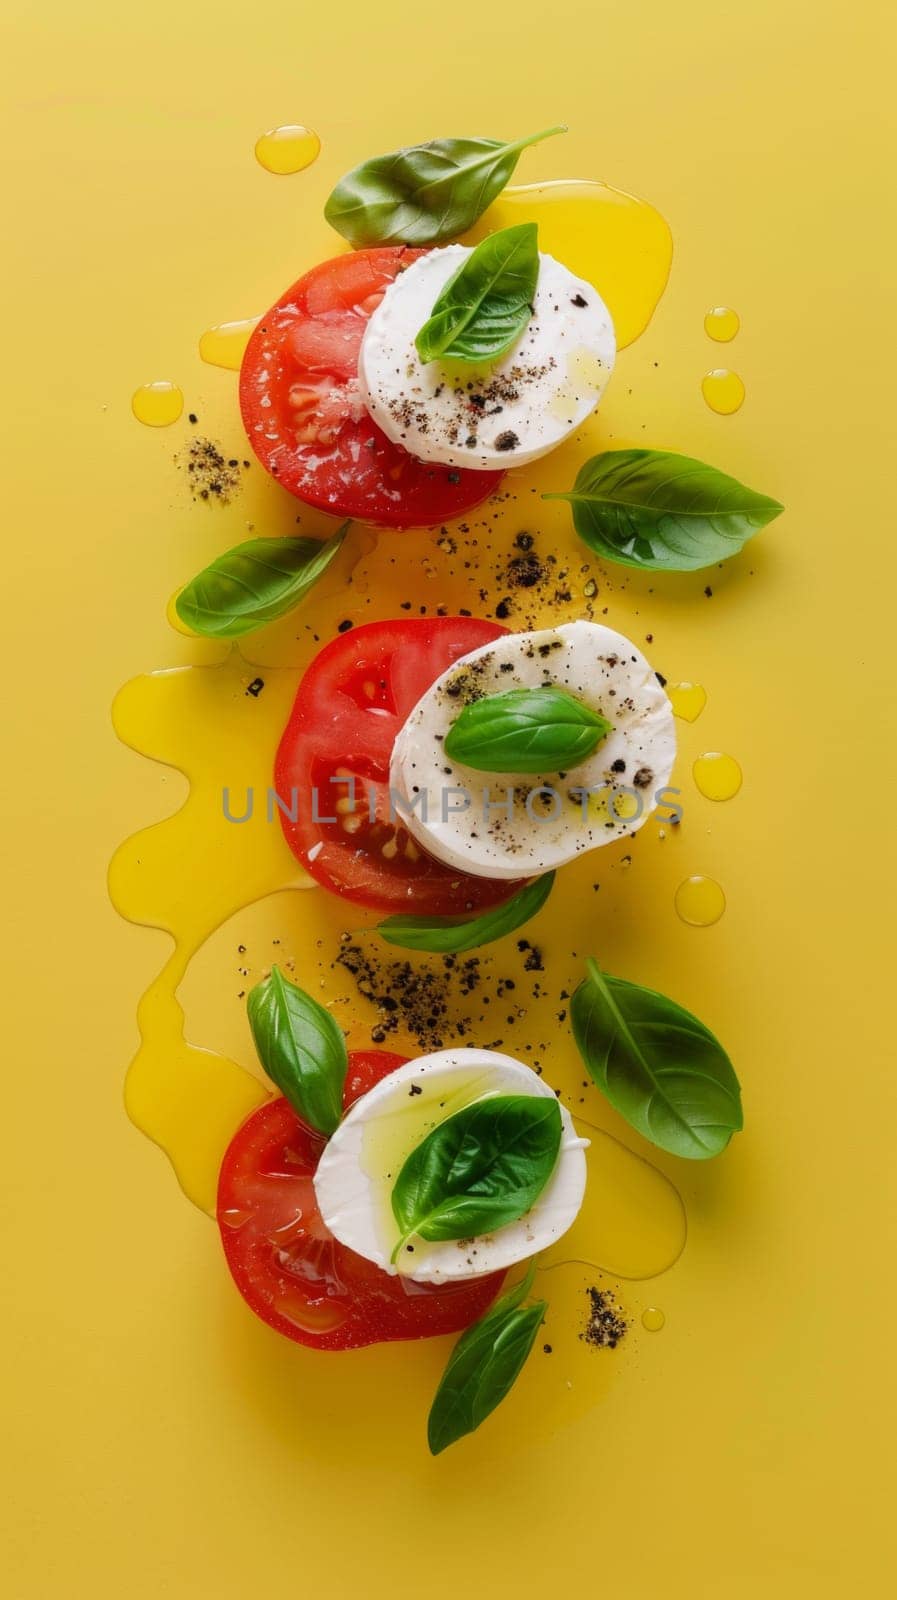 Top view of small portion of caprese salad on yellow background.